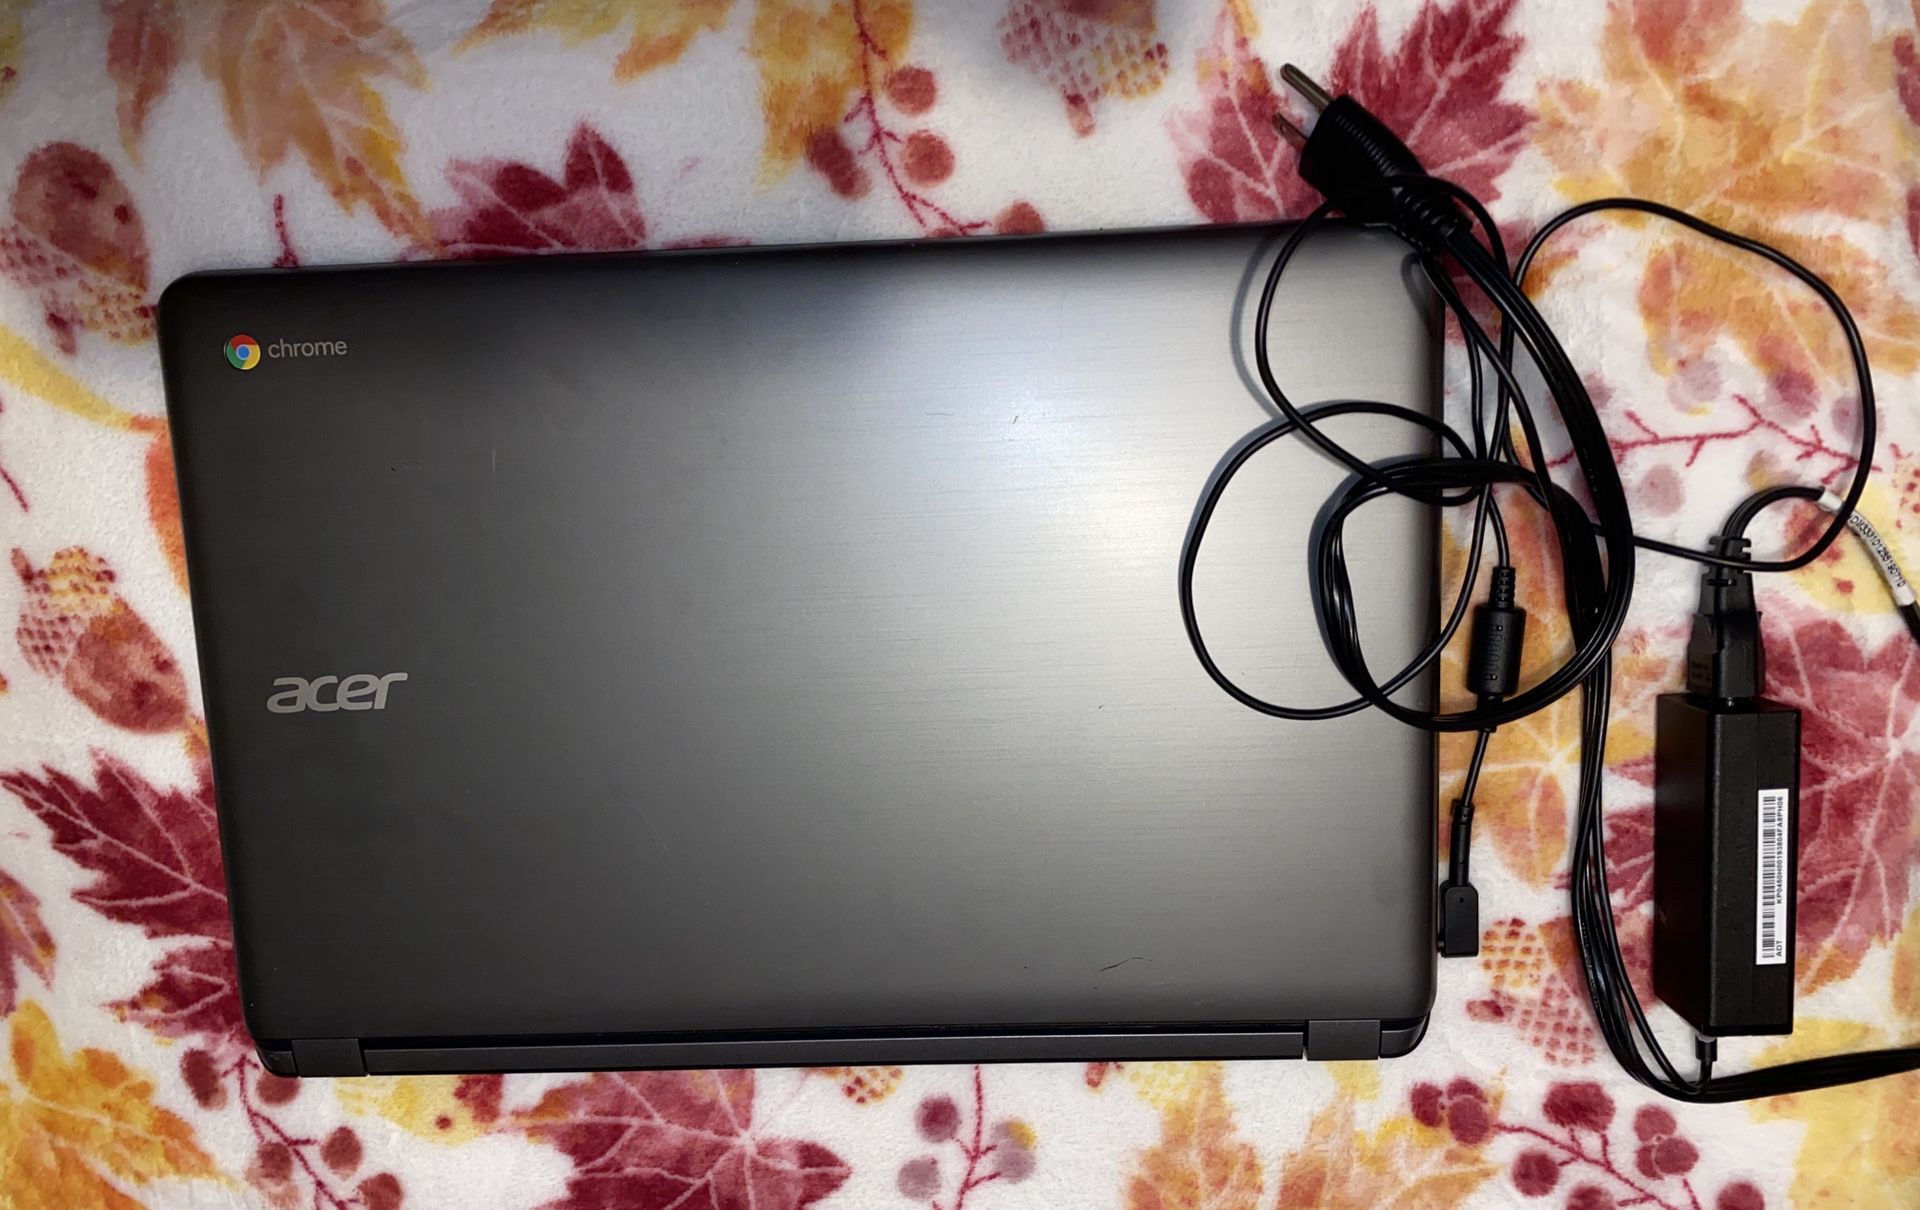 Chrome book Laptop $100 charger included, will deliver. Perfectly fine.